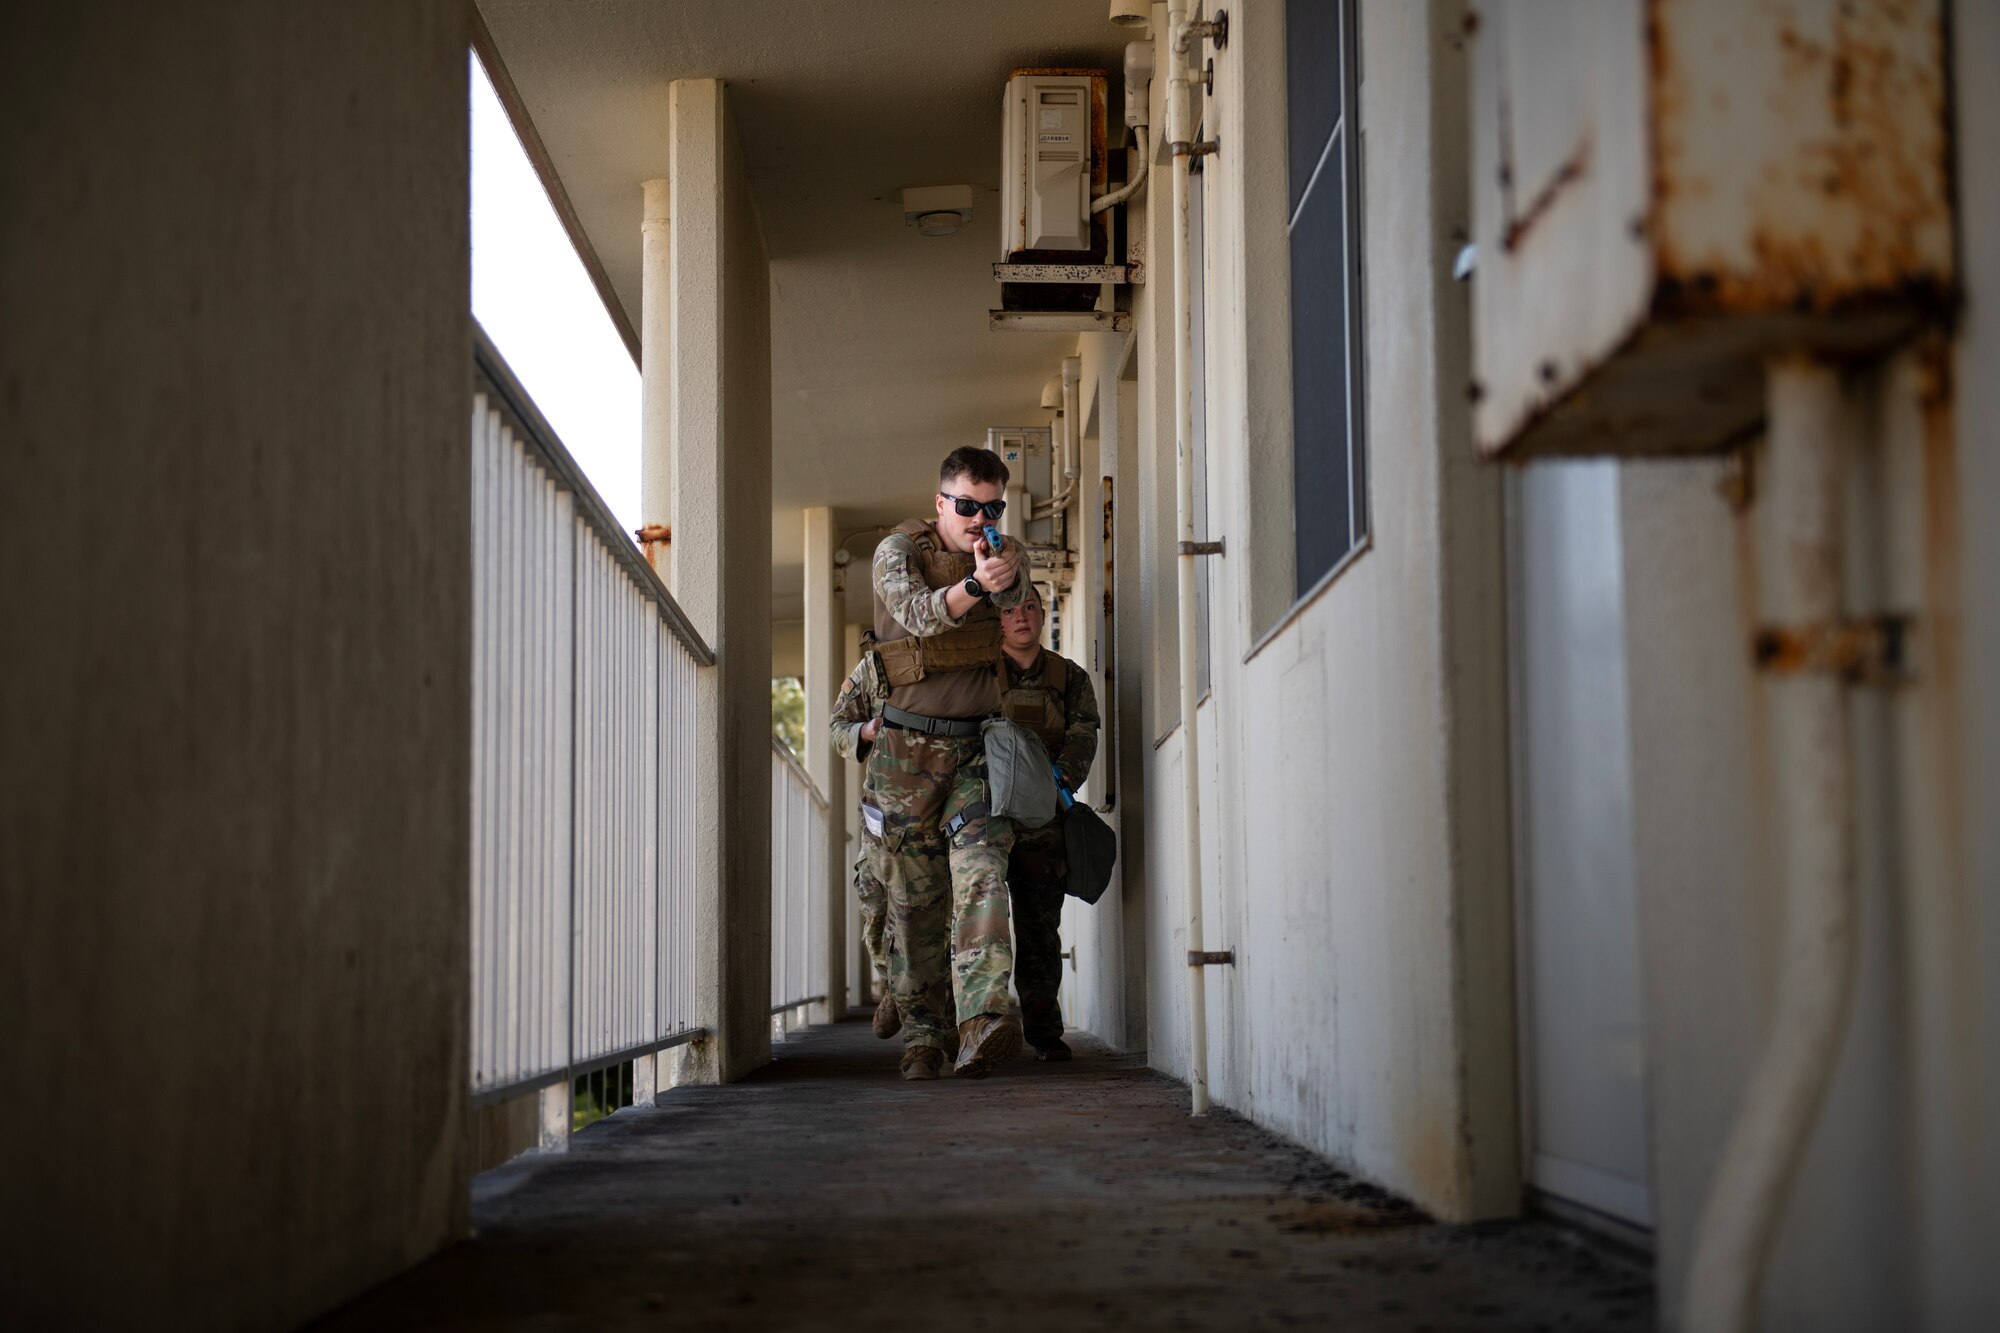 military member walks crouched down a hallway